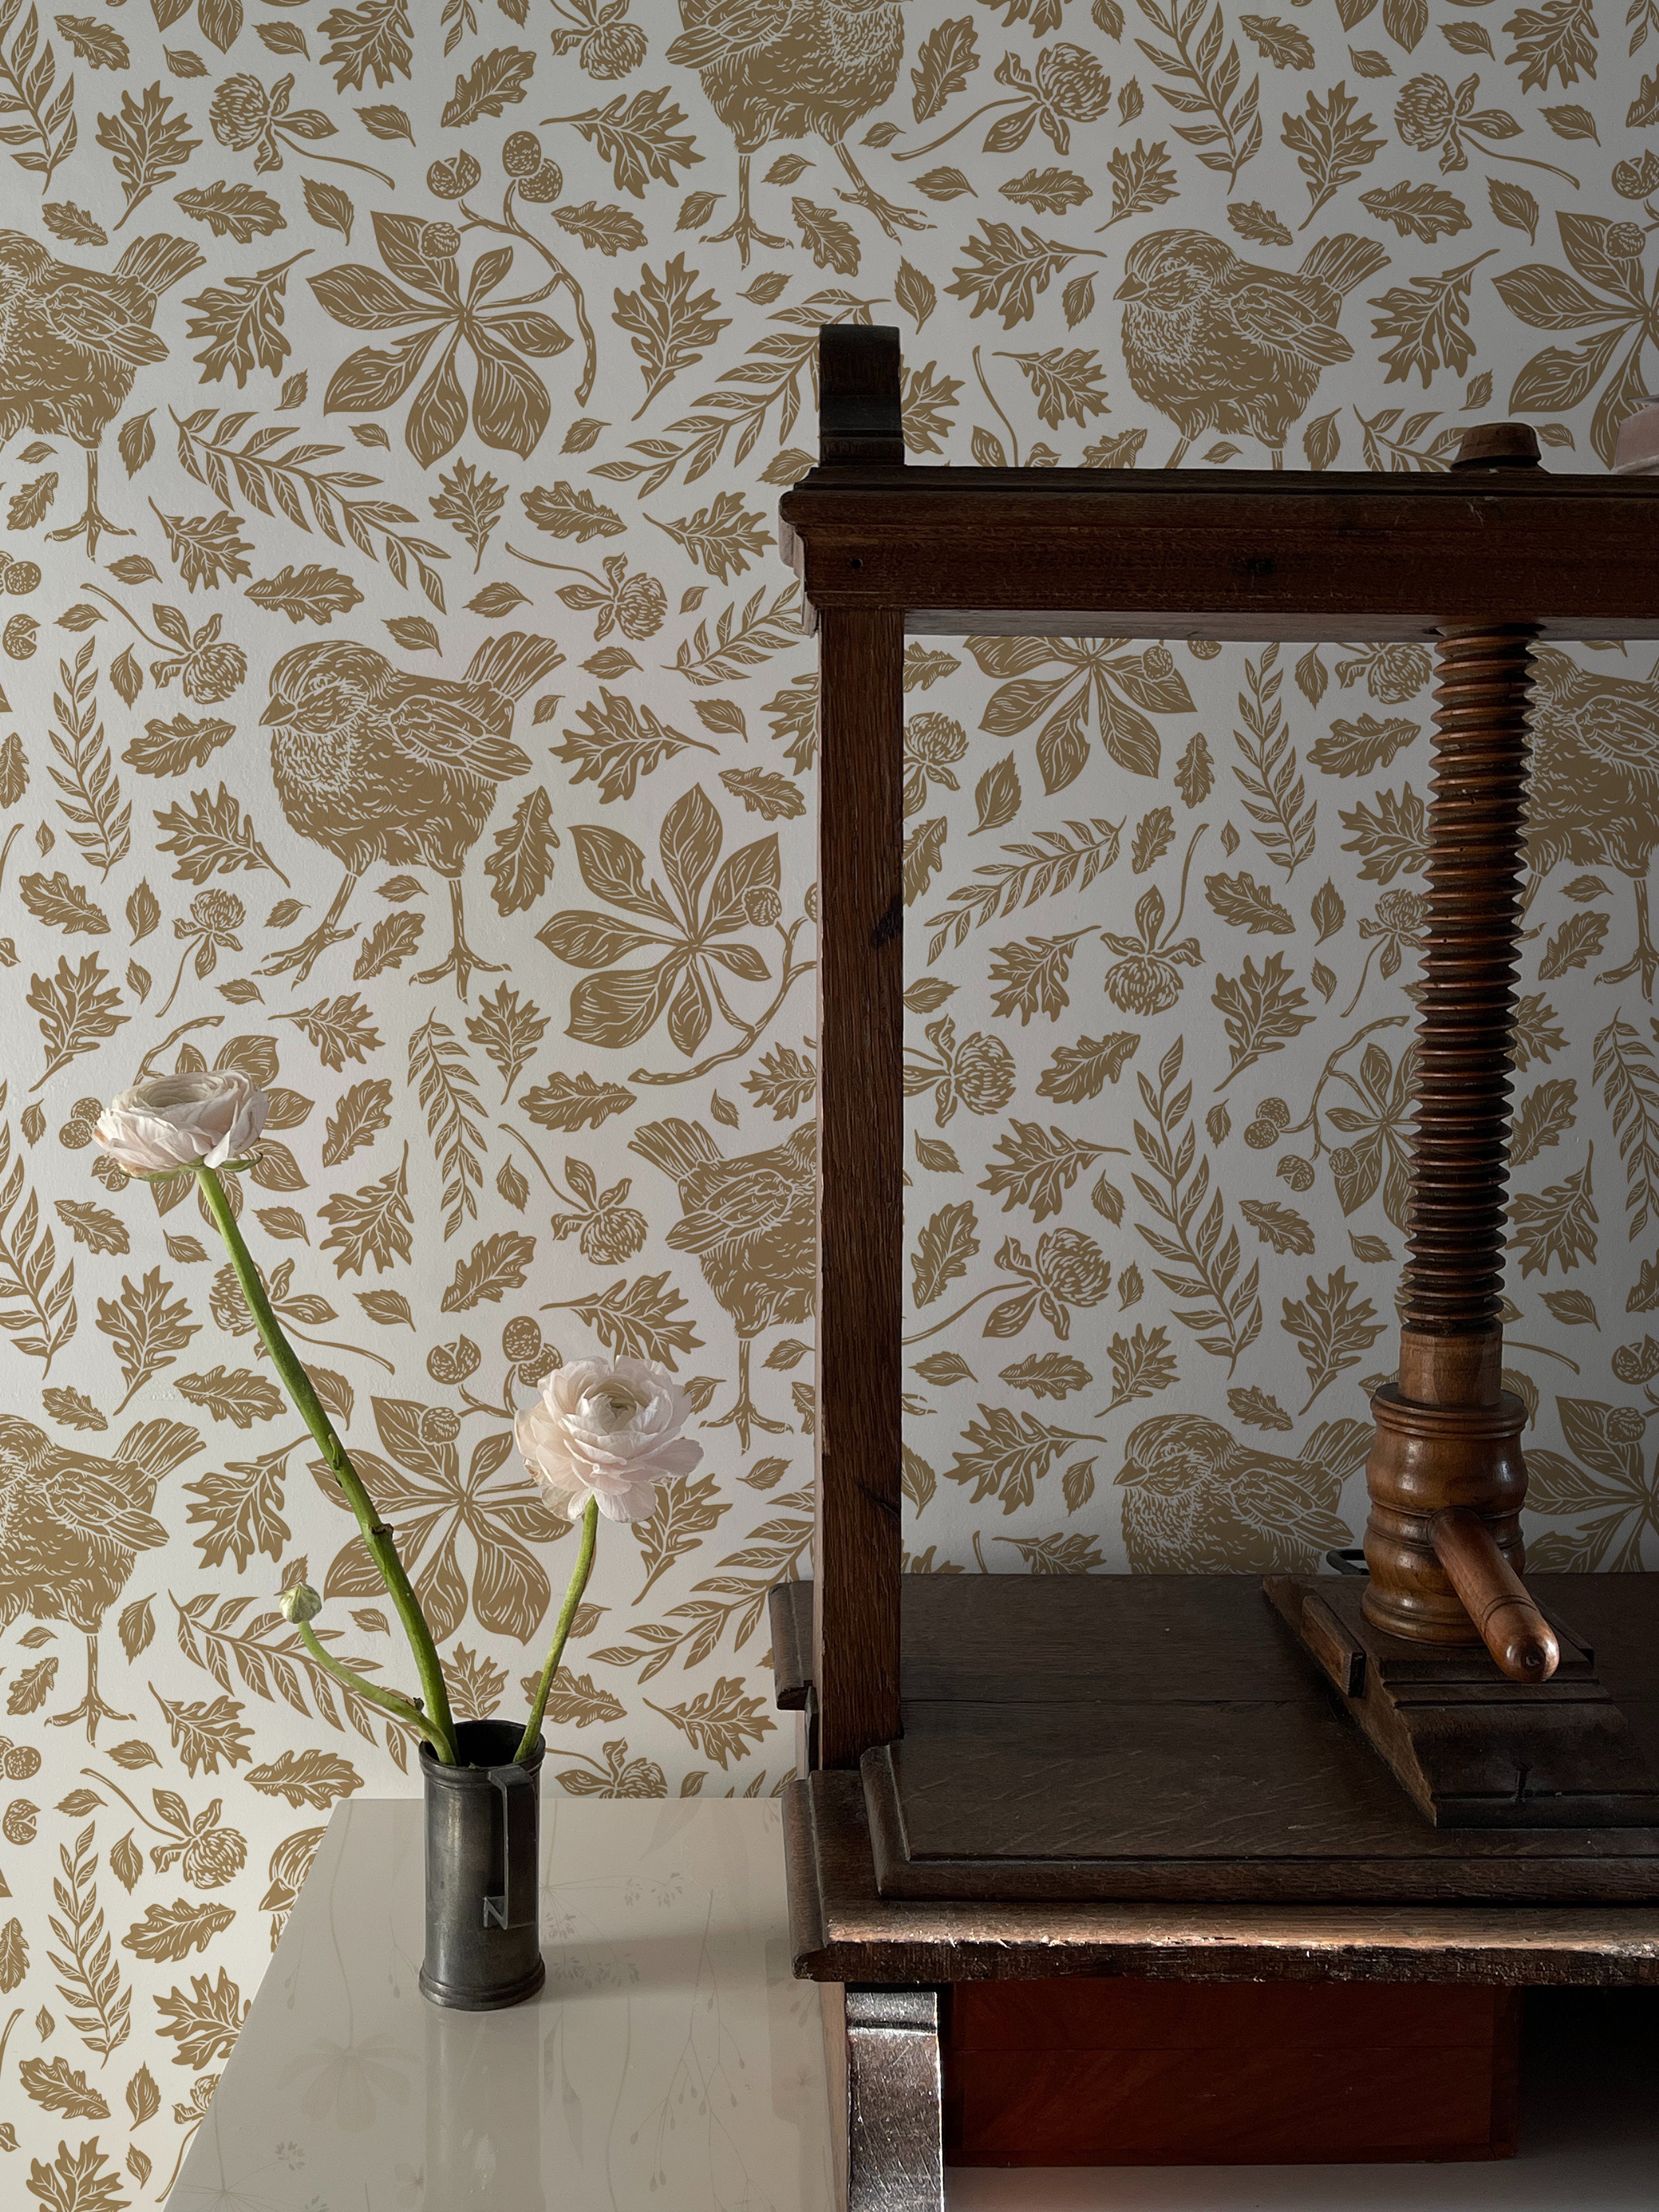 A detailed view of a vintage-style wallpaper featuring golden sparrows and an assortment of leaves and floral patterns on a cream background. An antique wooden spindle stands against the wall, with two light pink flowers in a small metal vase placed on a marble tabletop.